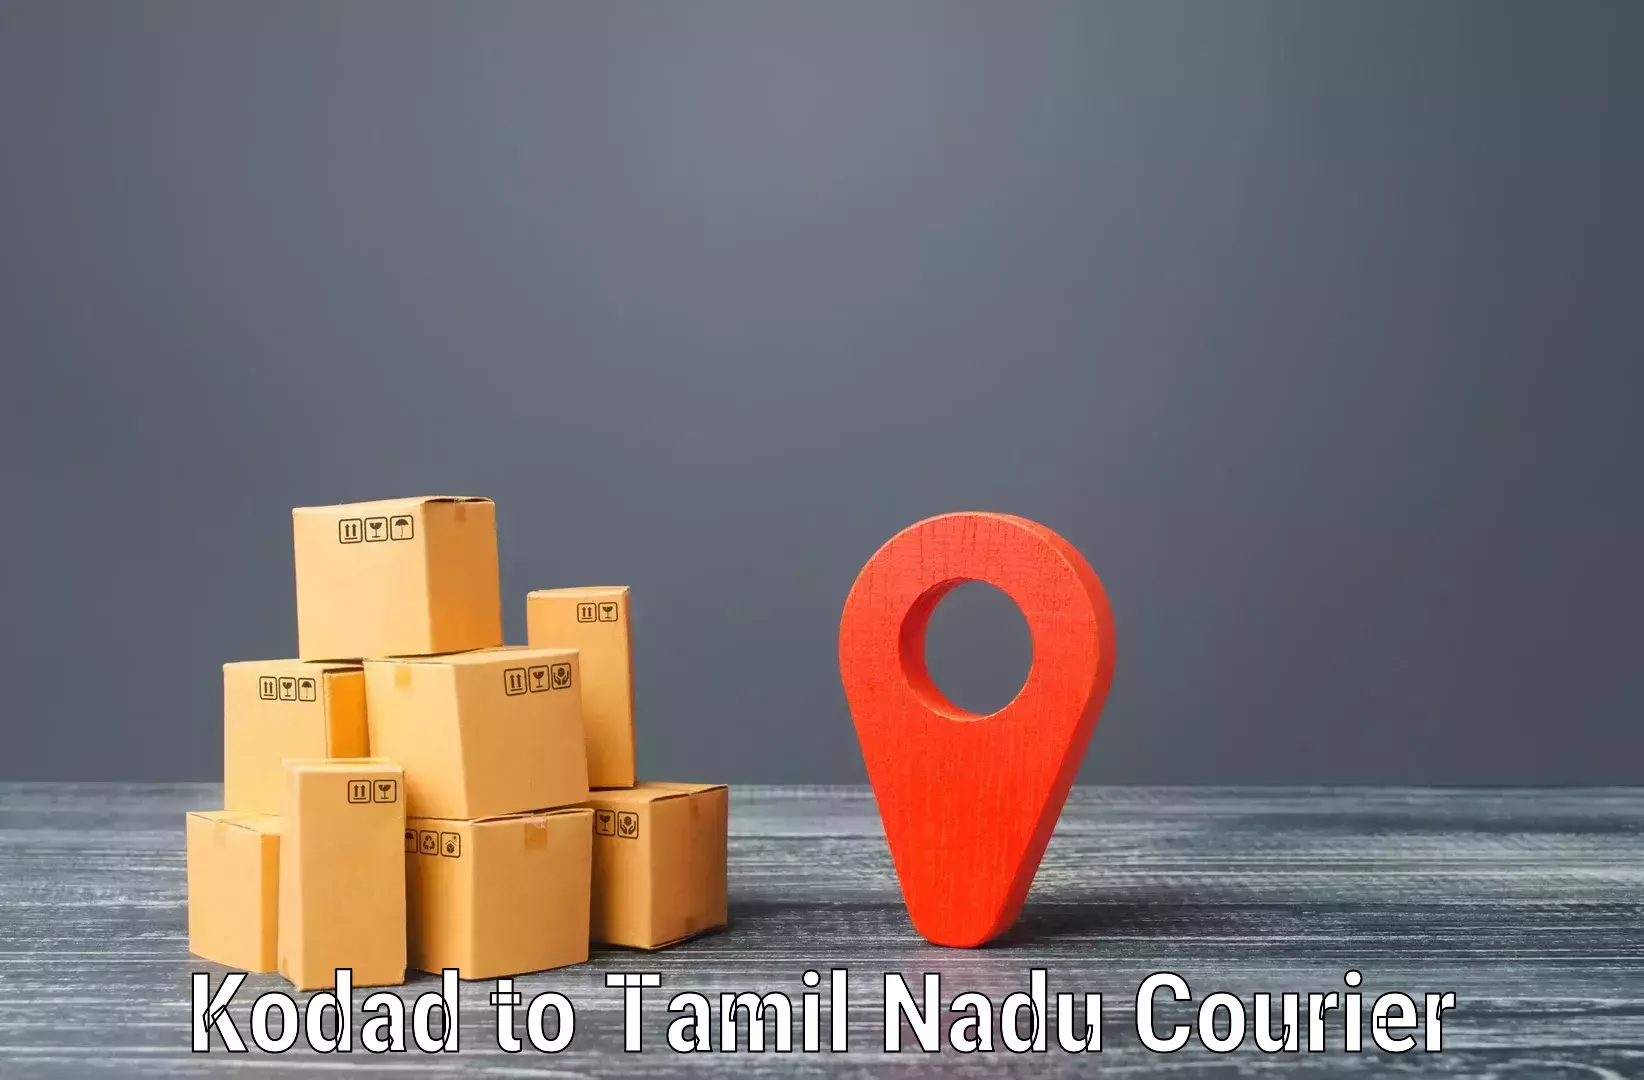 Multi-national courier services Kodad to Vadipatti